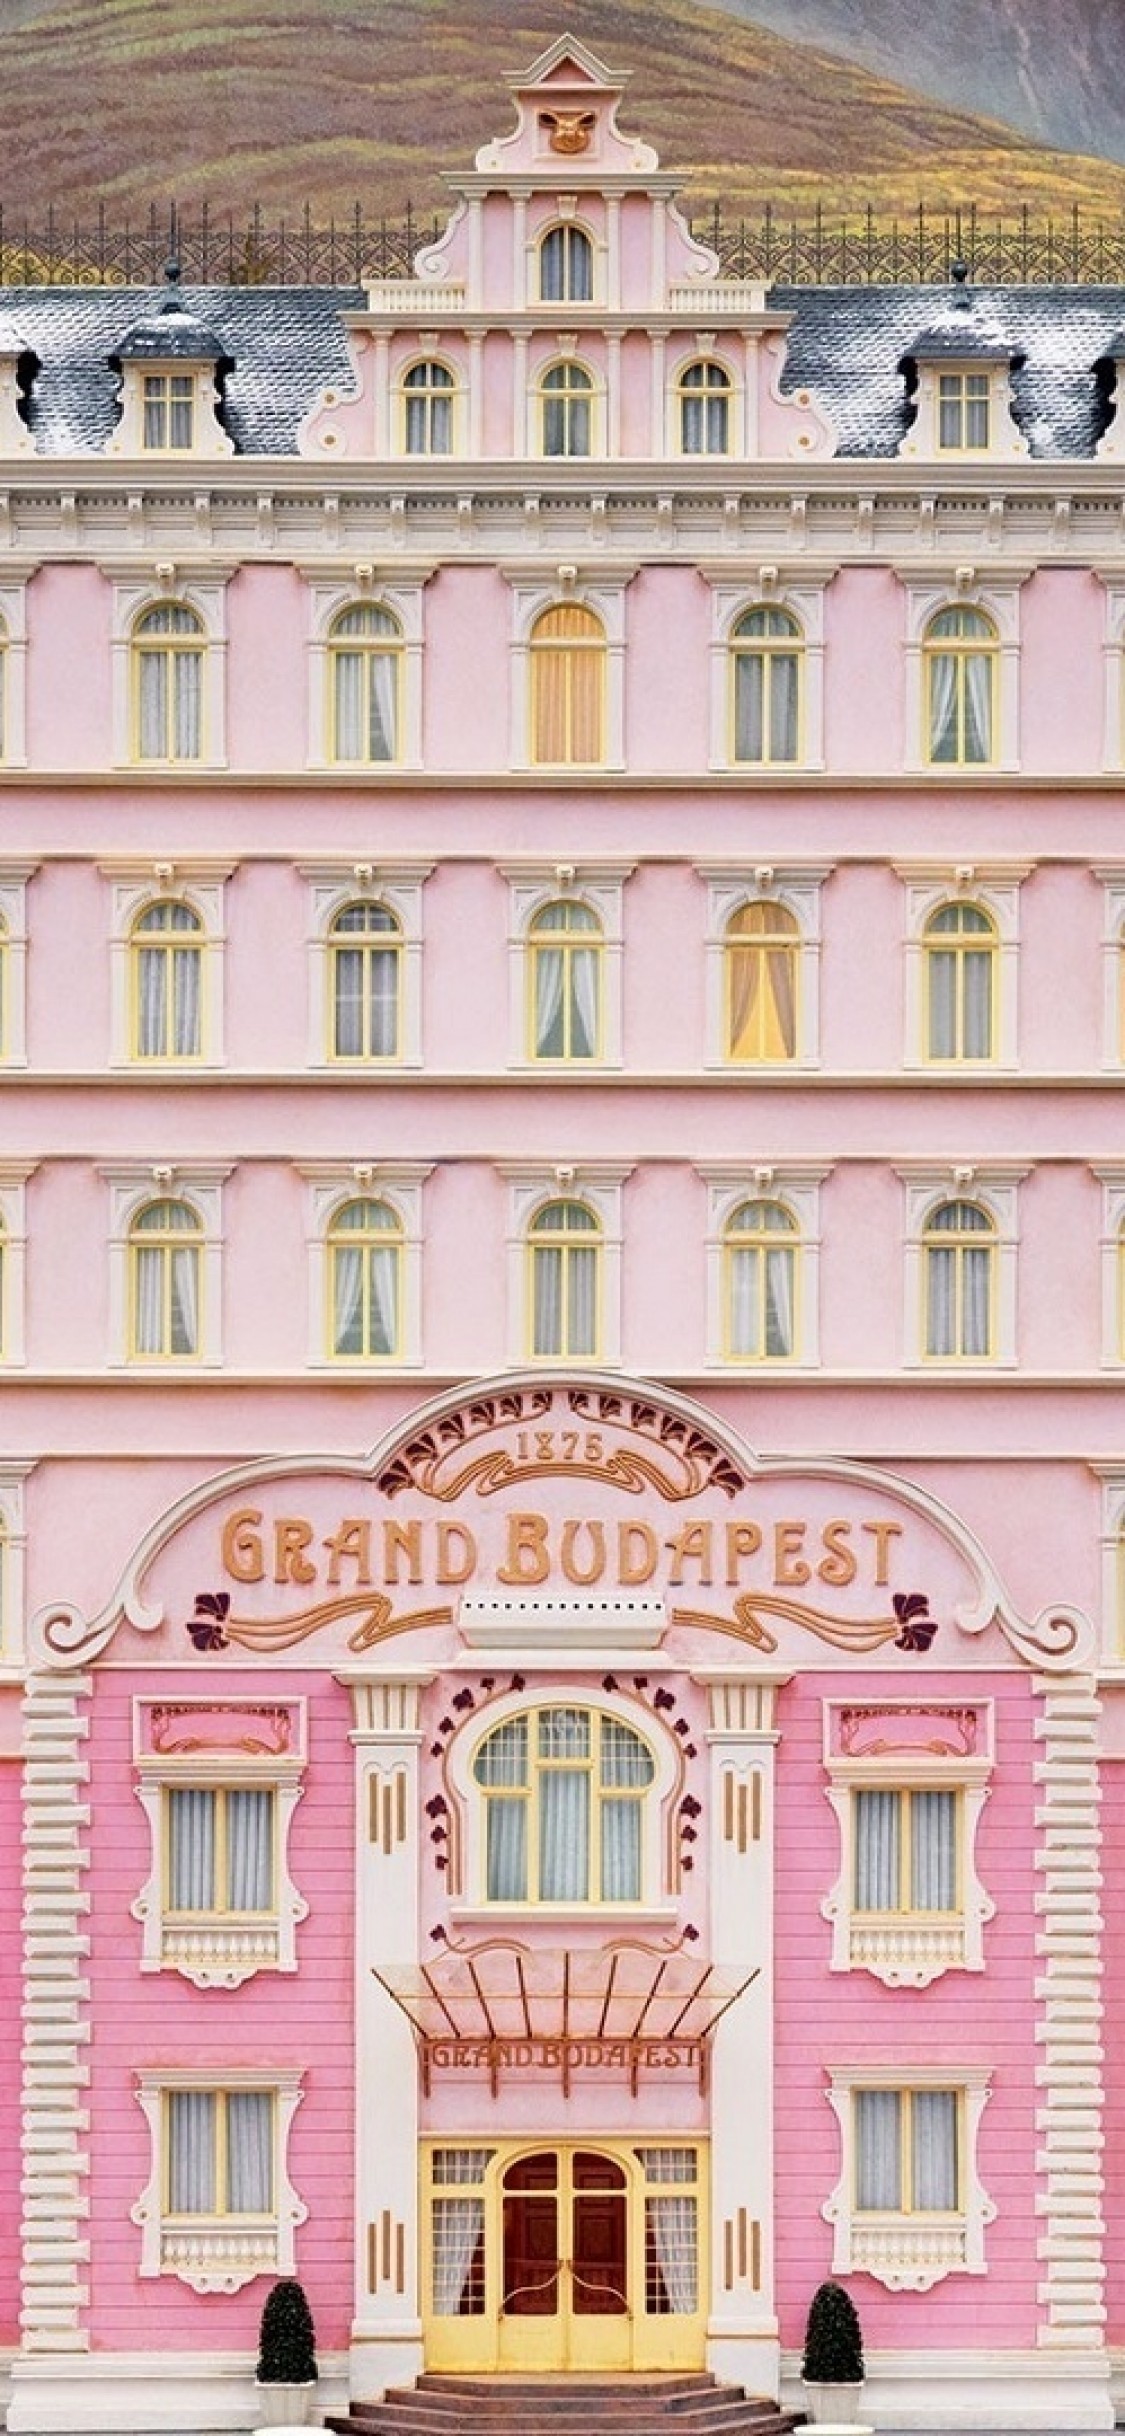 The Grand Budapest Hotel, Building